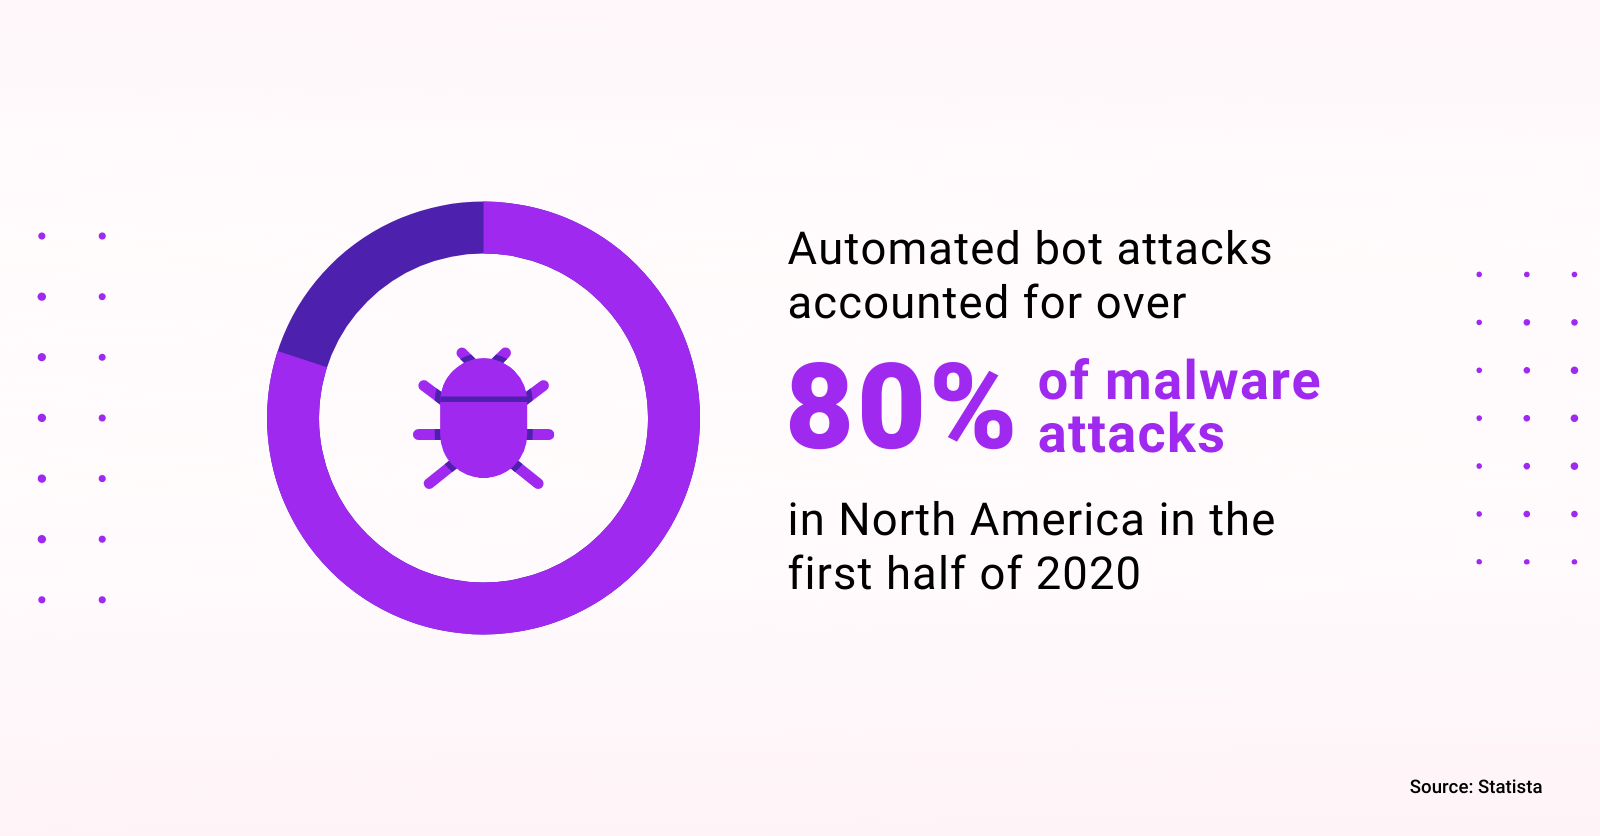 A graphic showing that automated bot attacks accounted for over 80% of malware attacks in North America in the first half of 2020